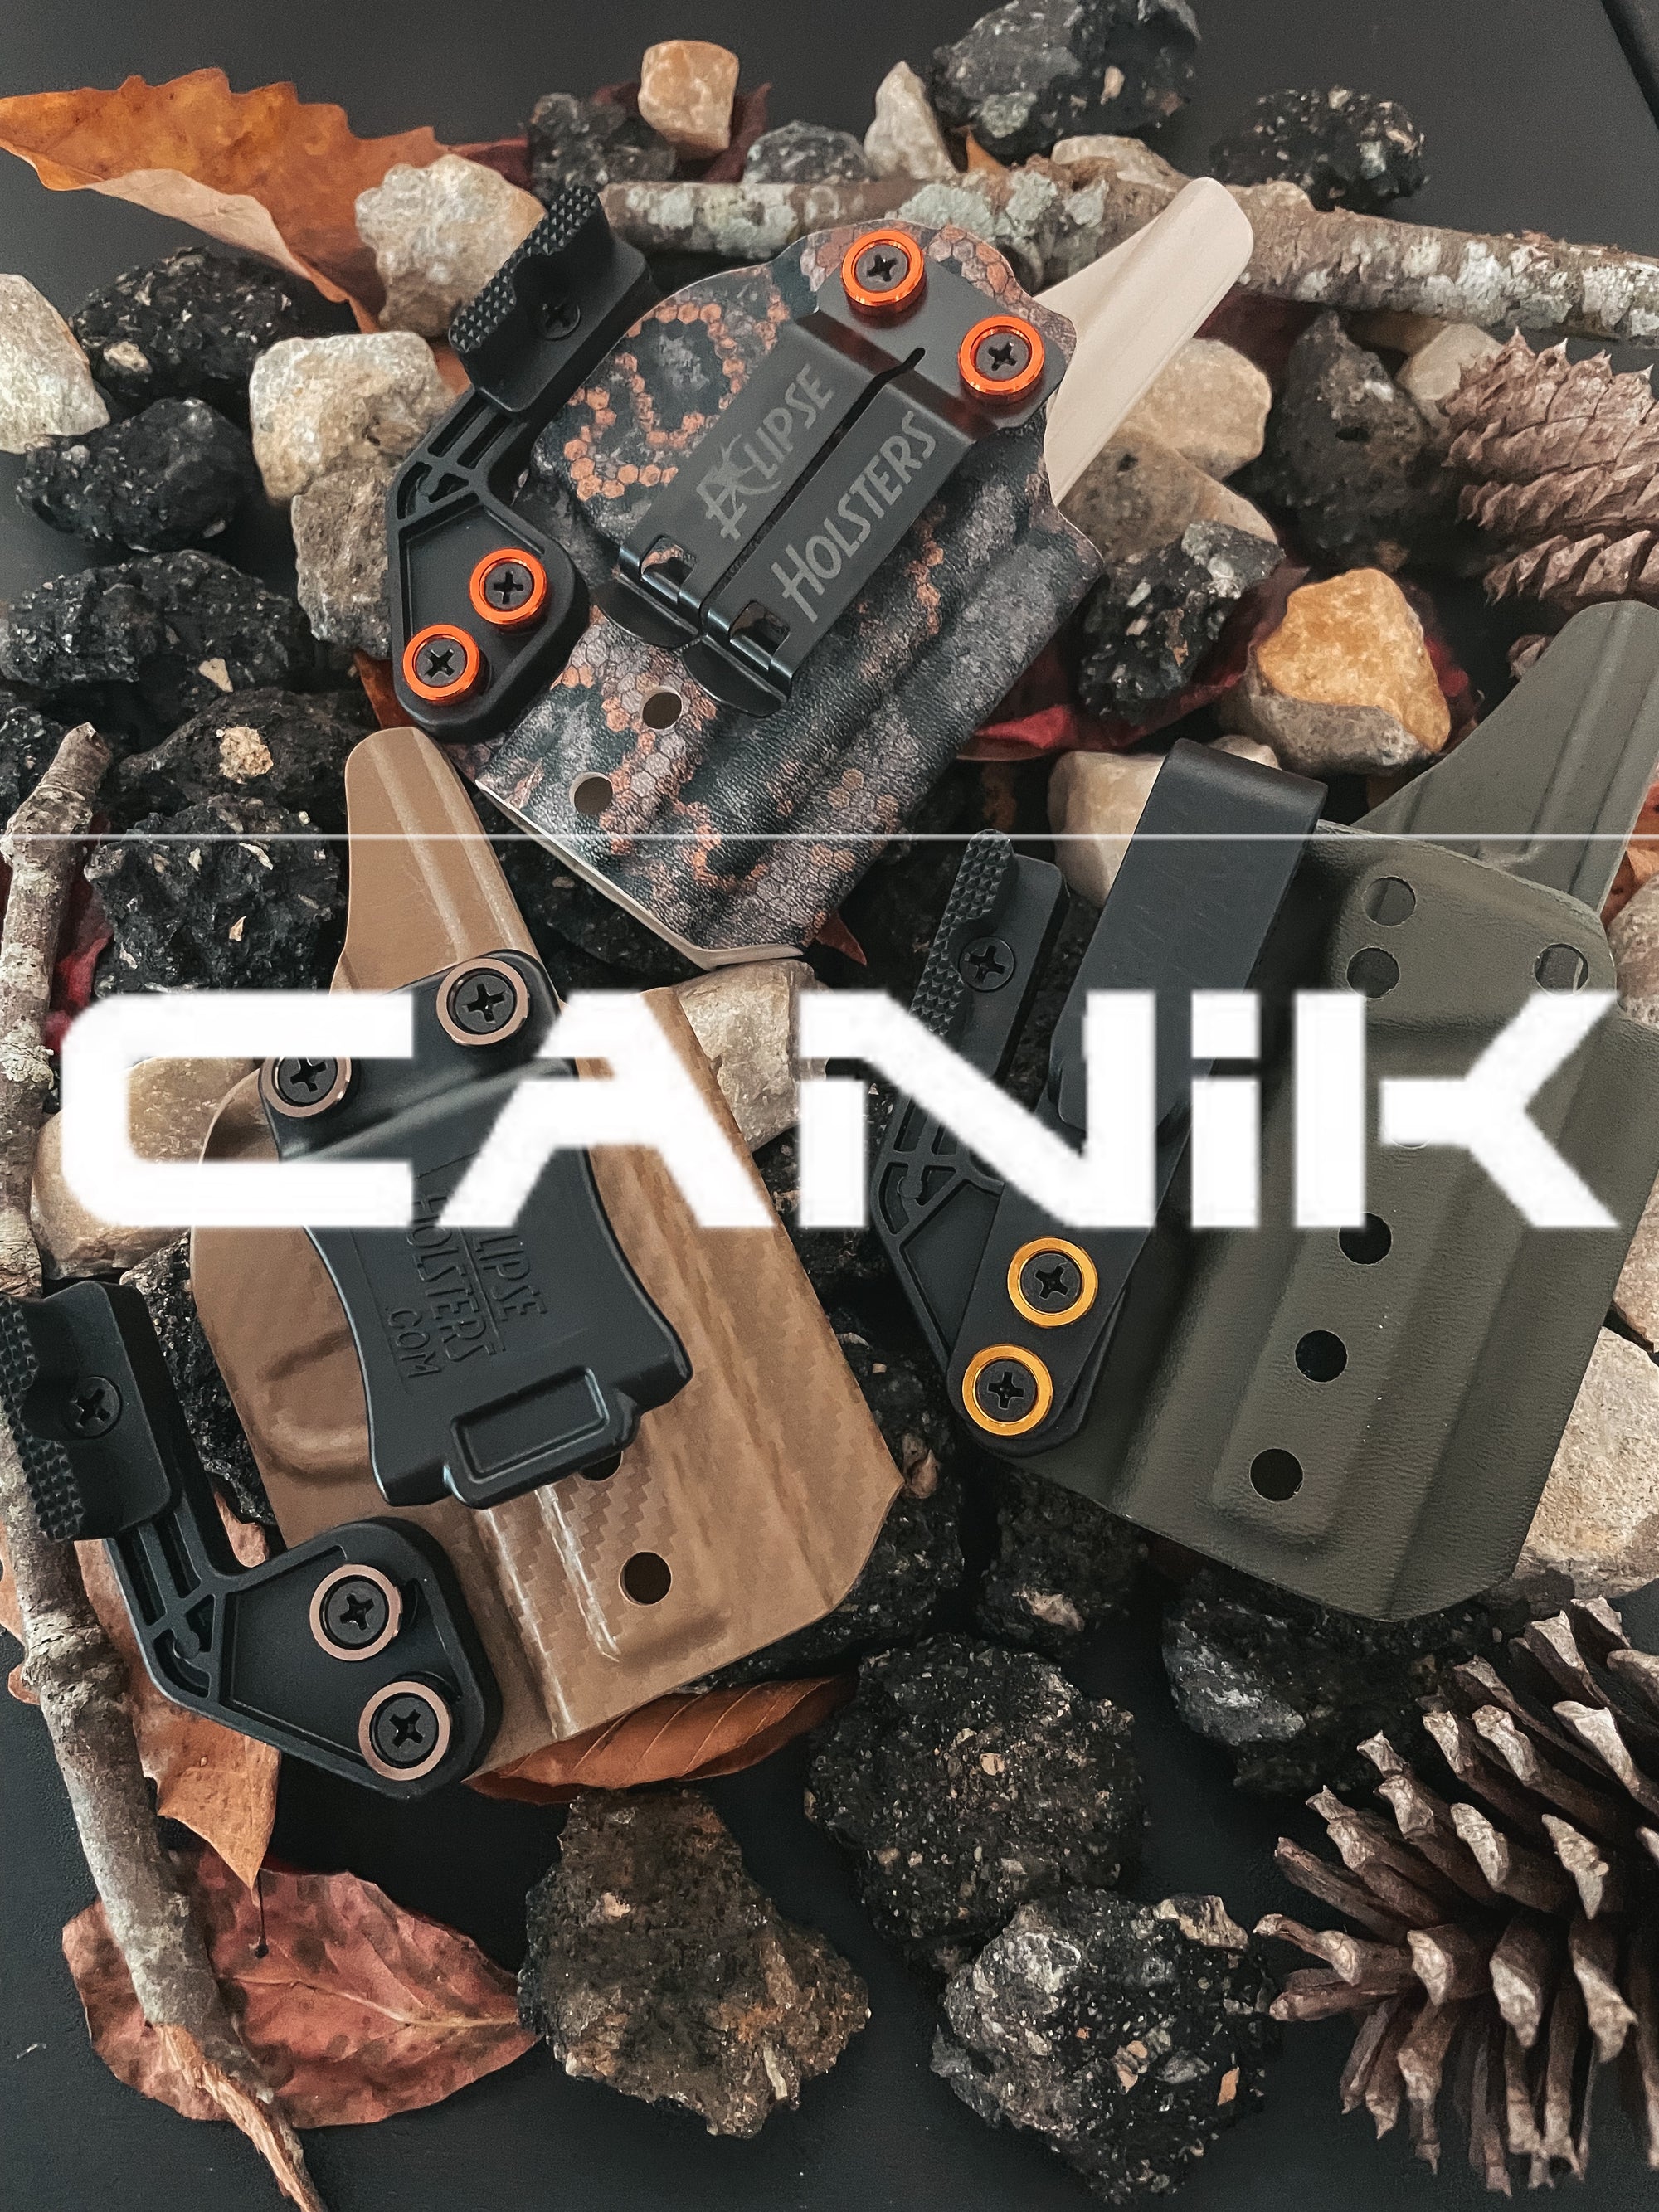 Canik Holsters